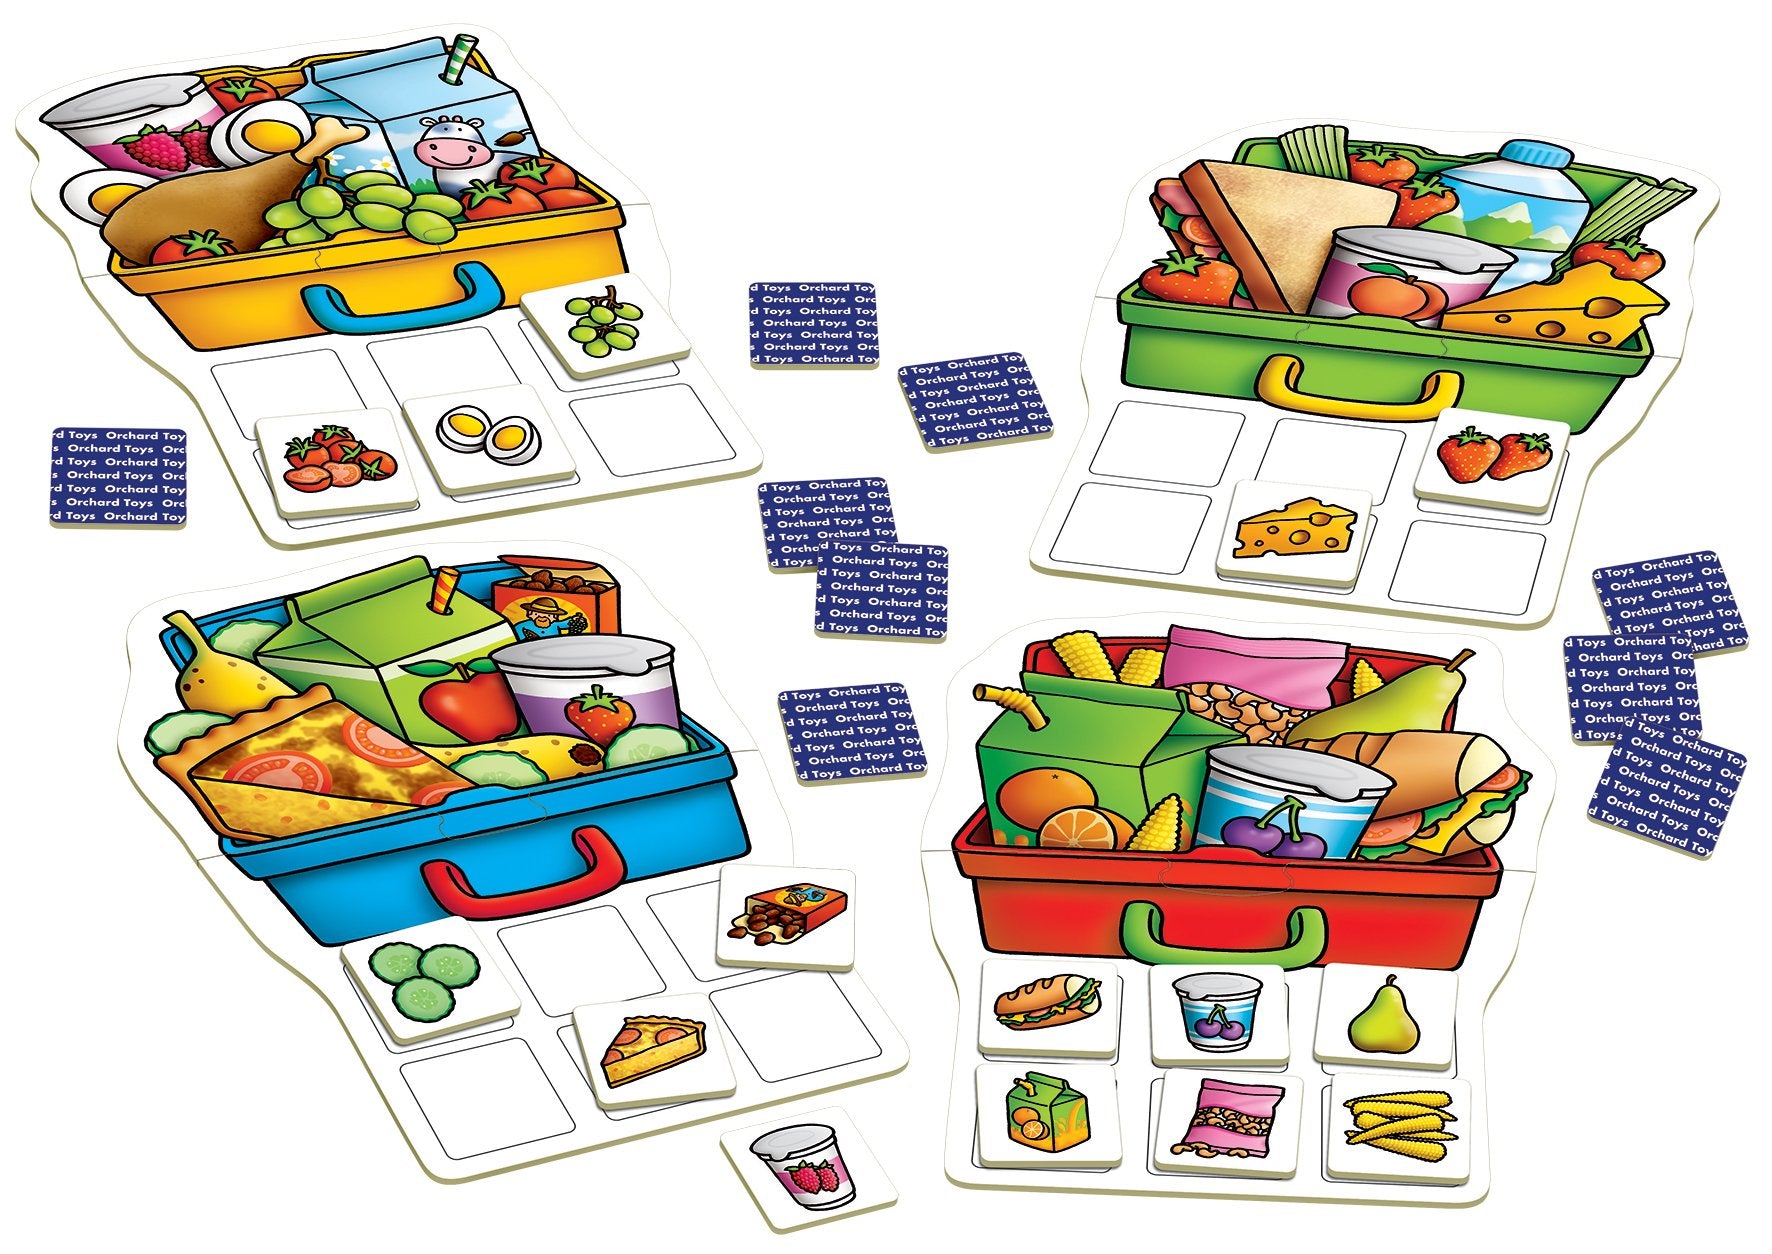 orchard-toys-lunch-box-game-3